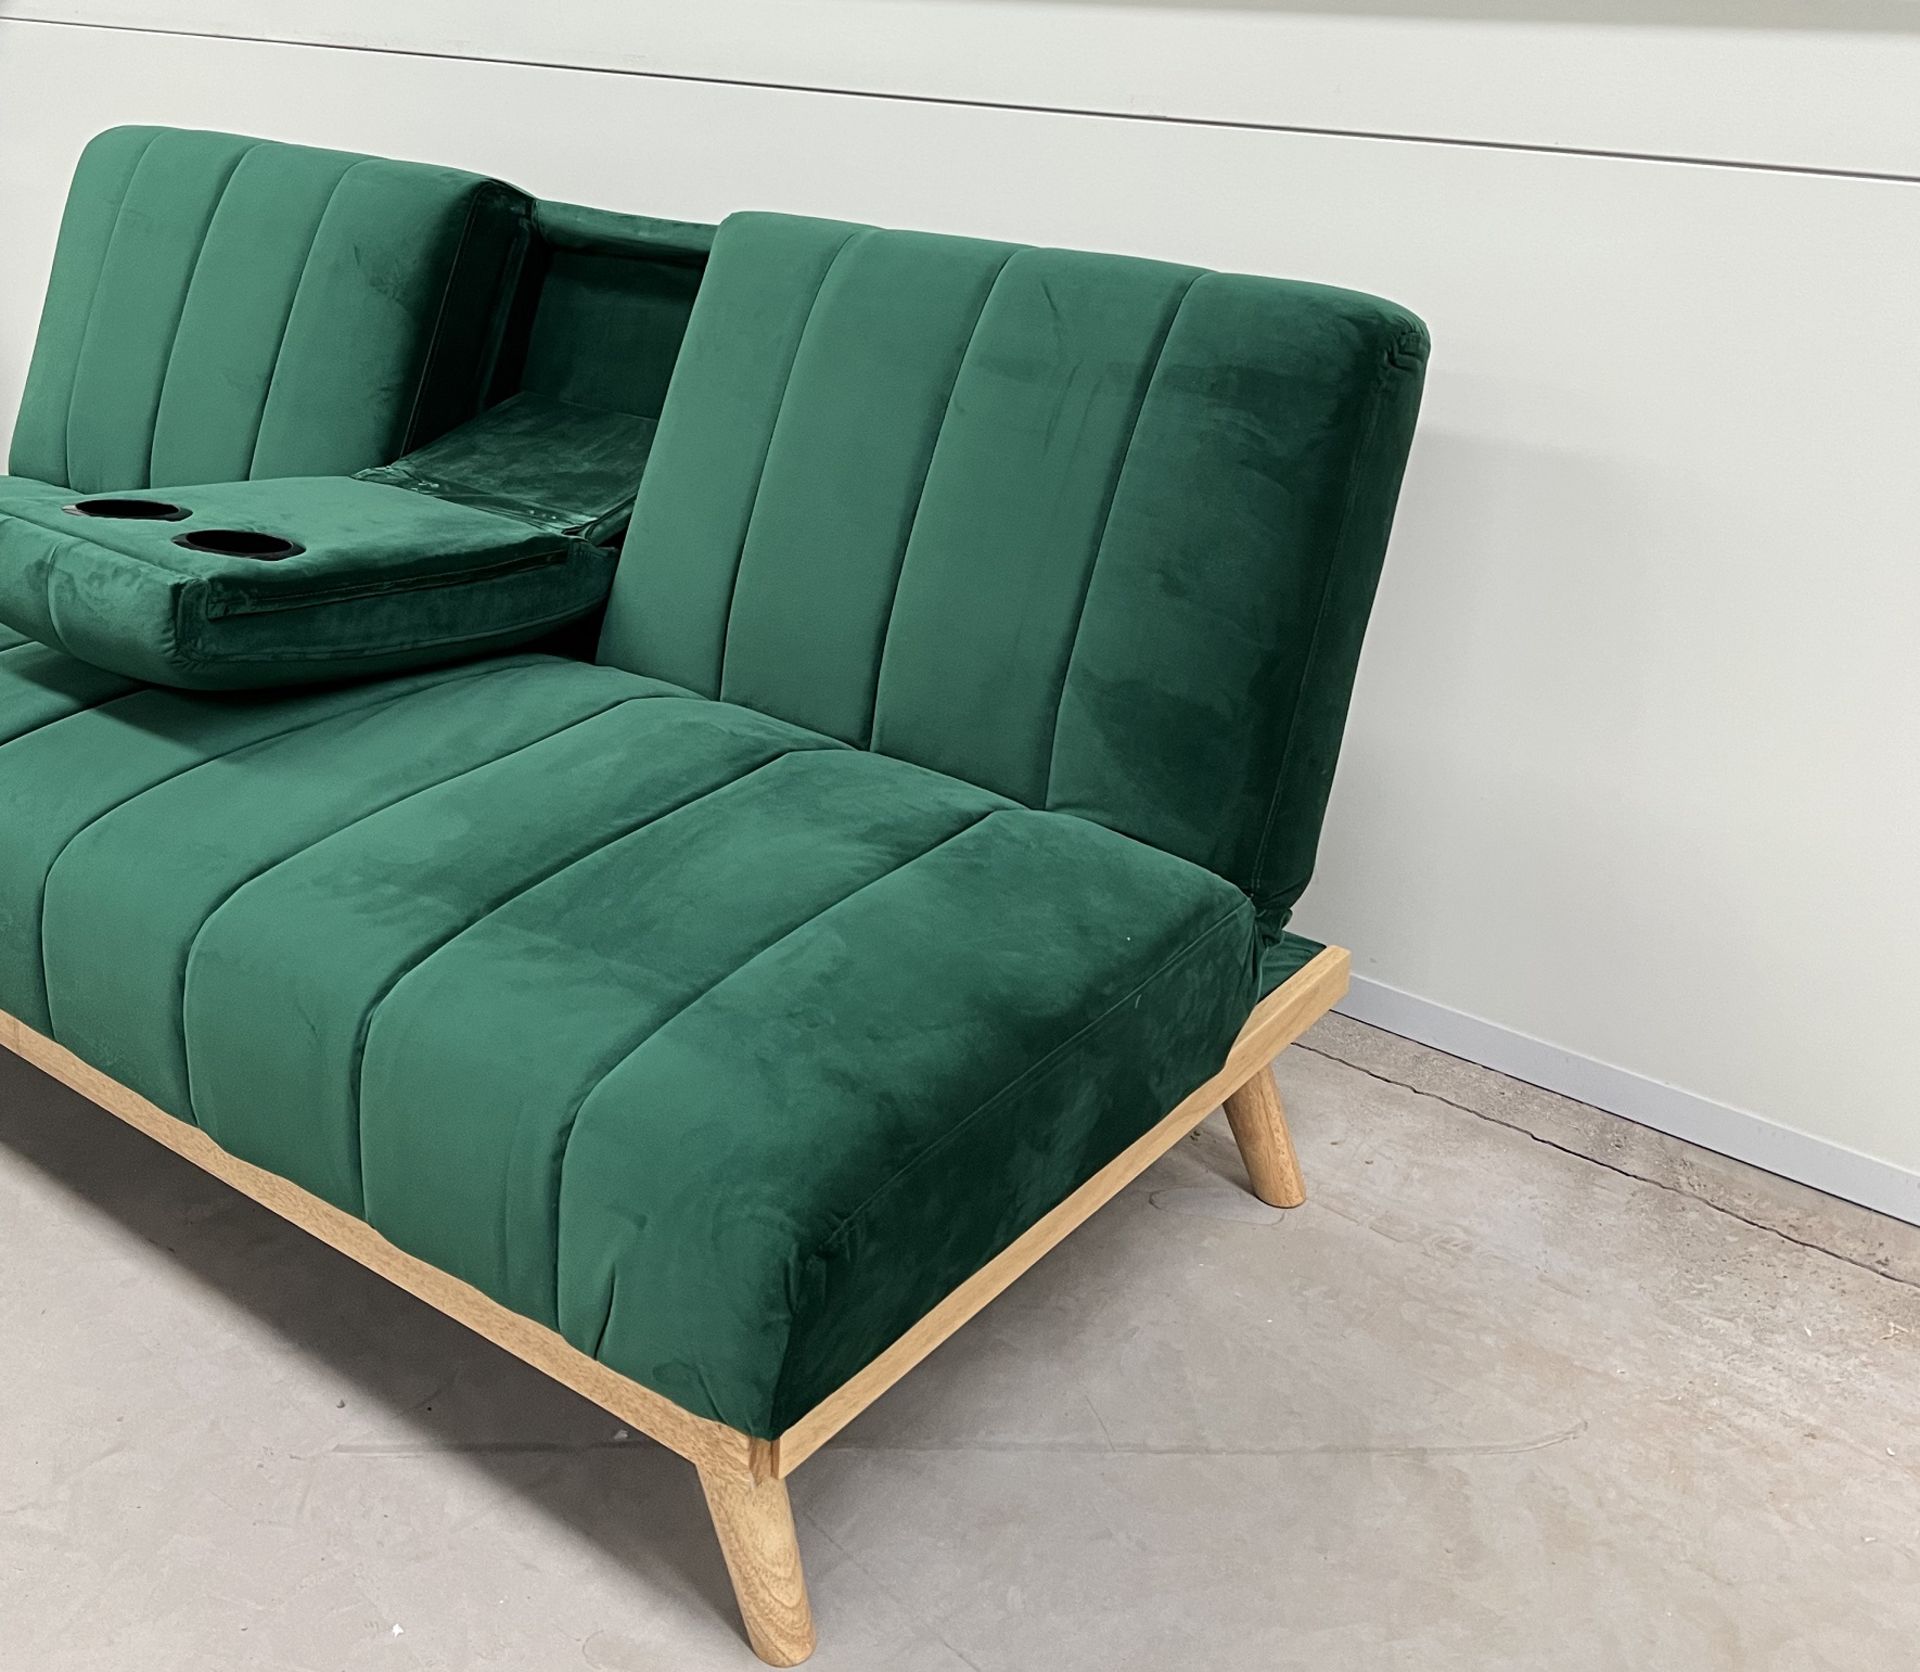 Etta Green Velvet 3 Seater Fold Down Sofa Bed Combines An Exciting Contemporary Shape With - Image 3 of 4